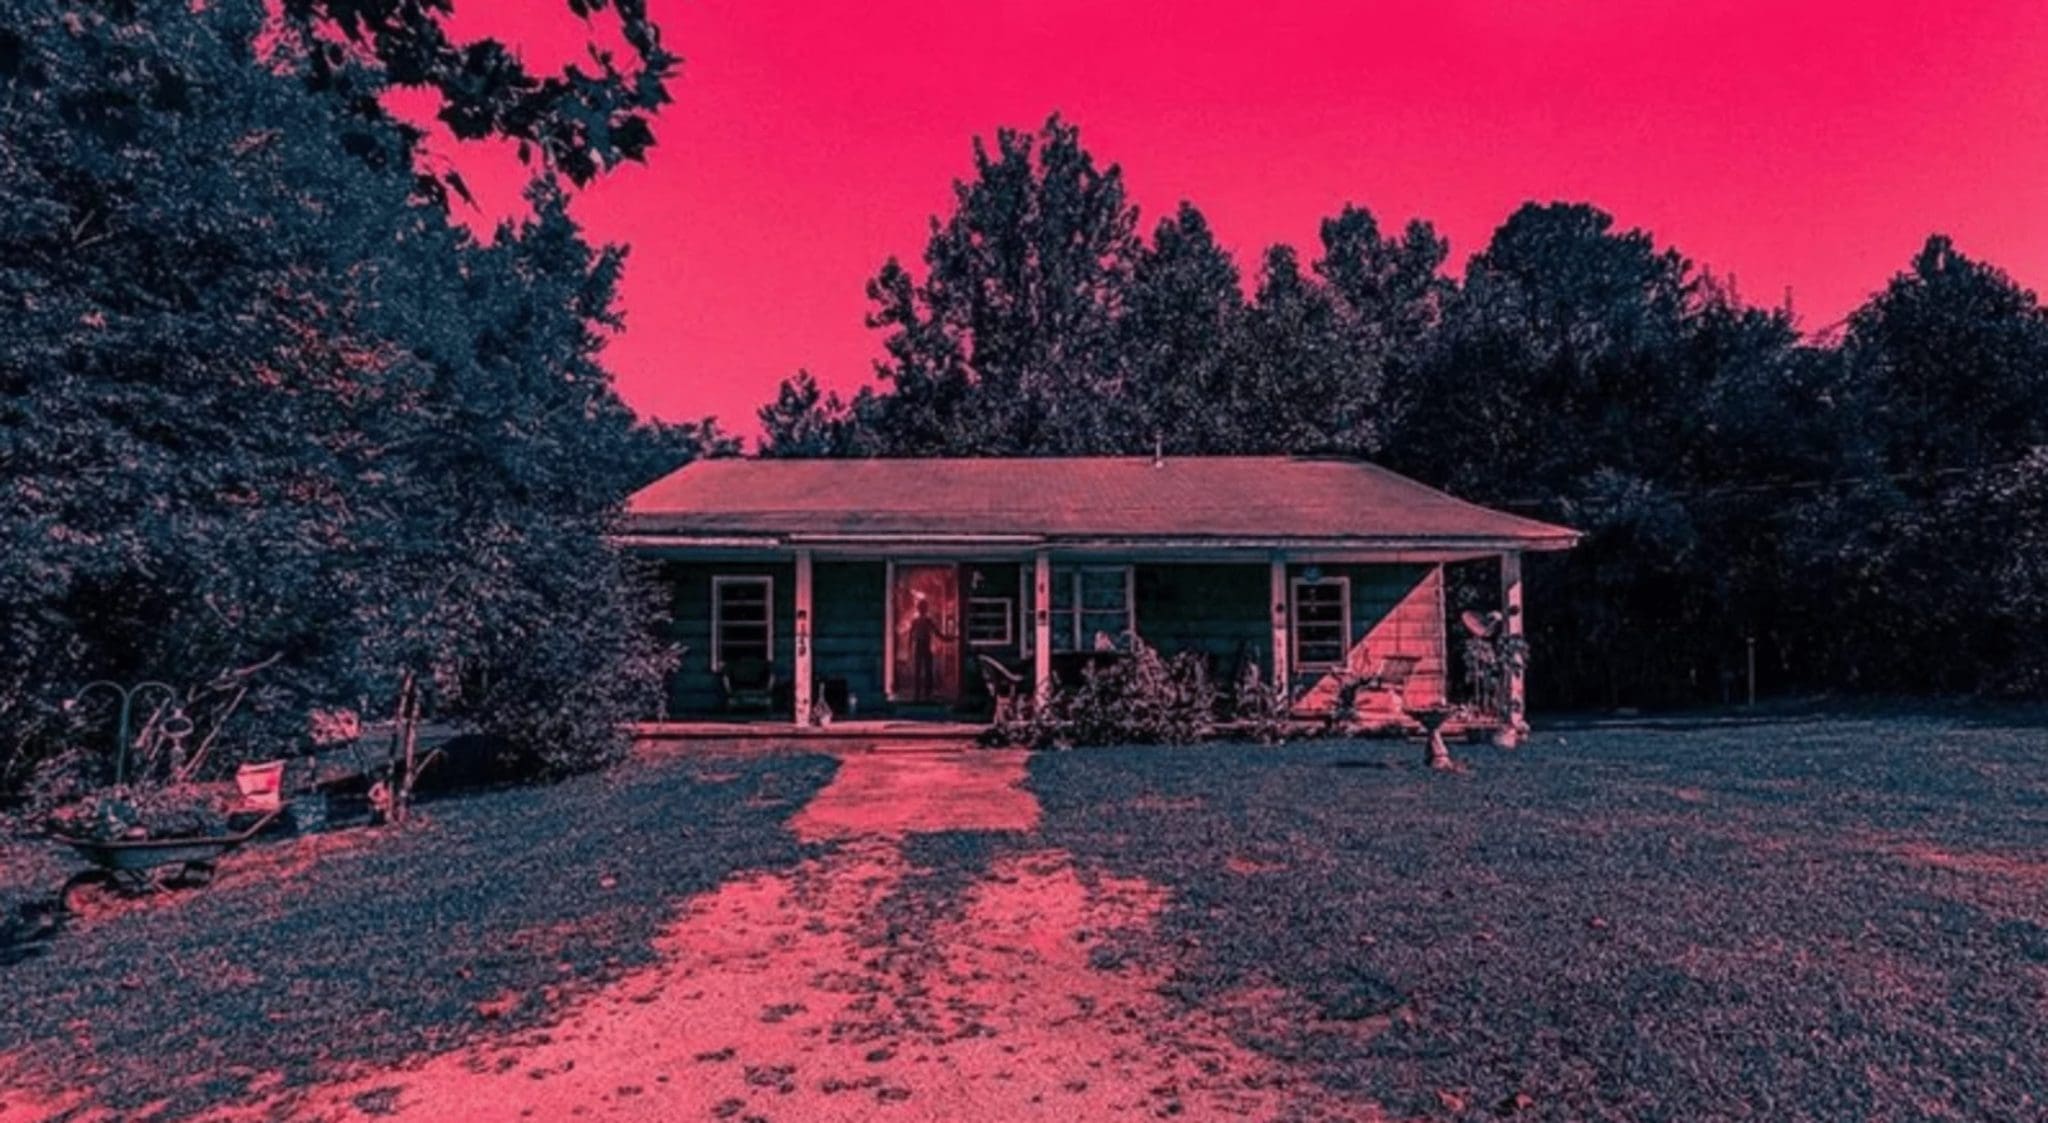 There is a $300,000 asking price for the Byers' Georgia home, which was featured in the Netflix series Stranger Things.